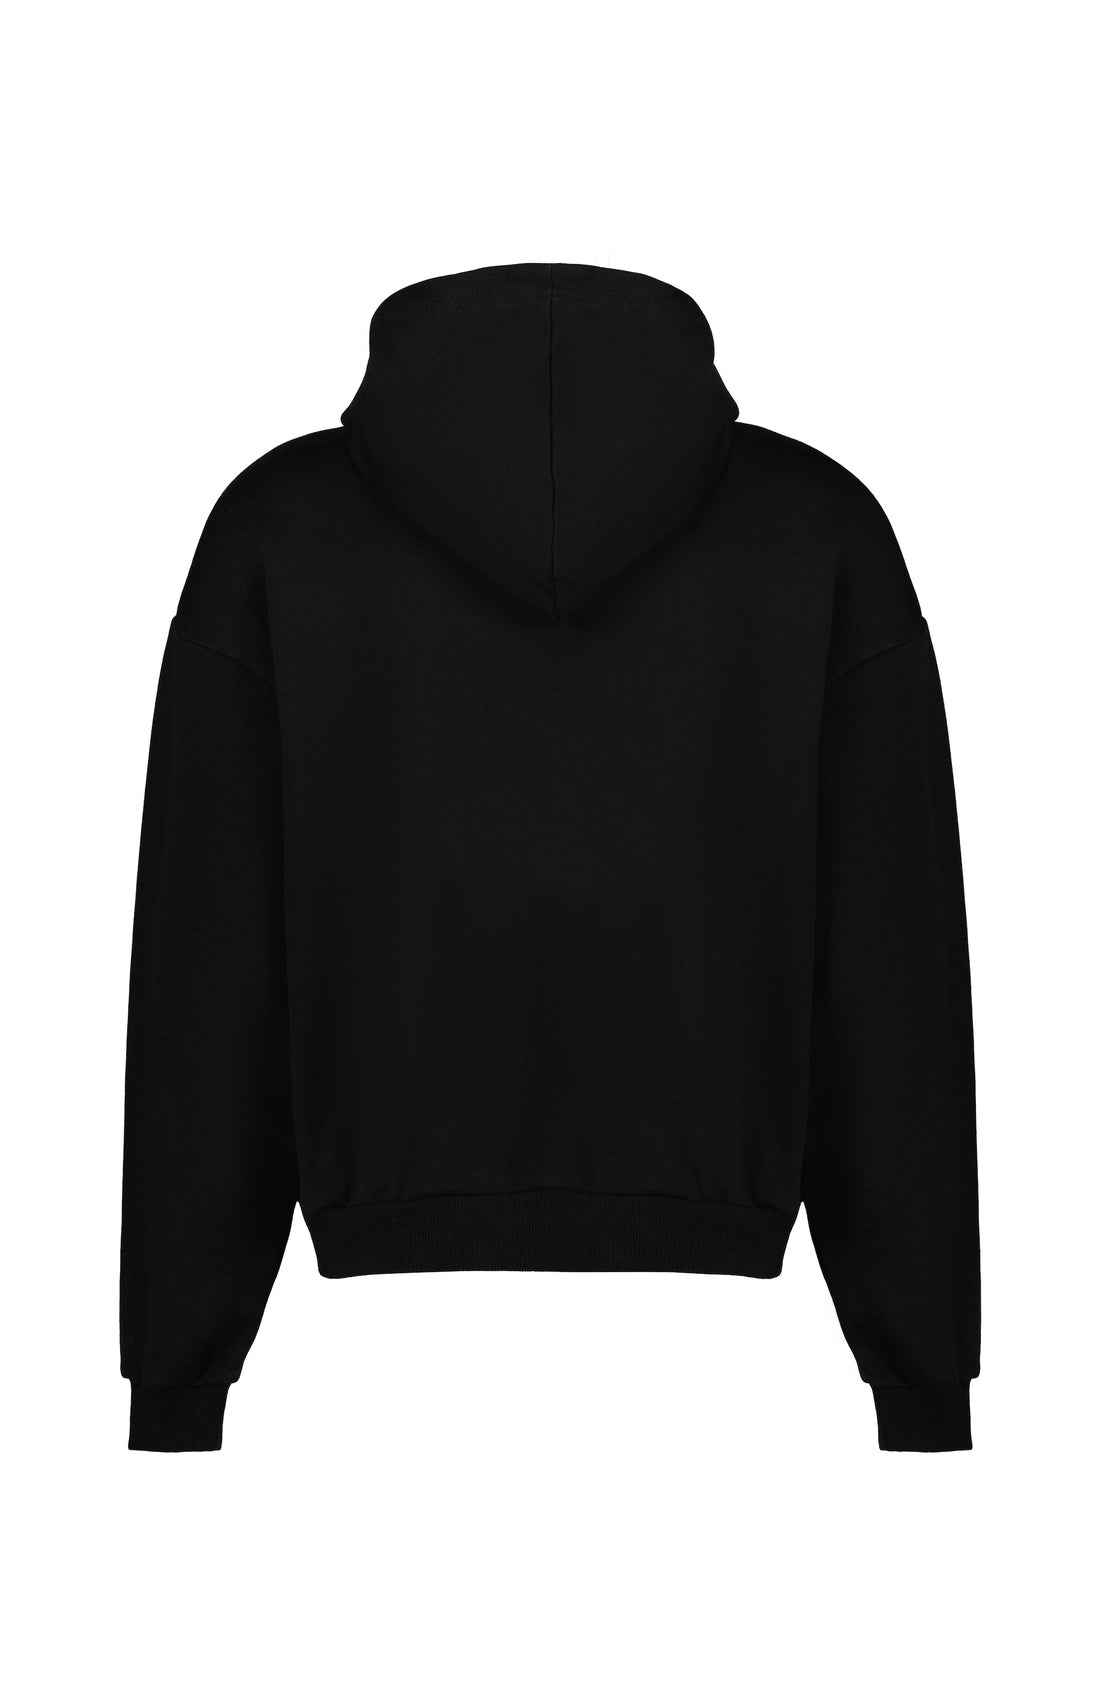 Premium Streetwear Heavy-weight Hoodie. Expertly crafted in Portugal. Located in Dubai.